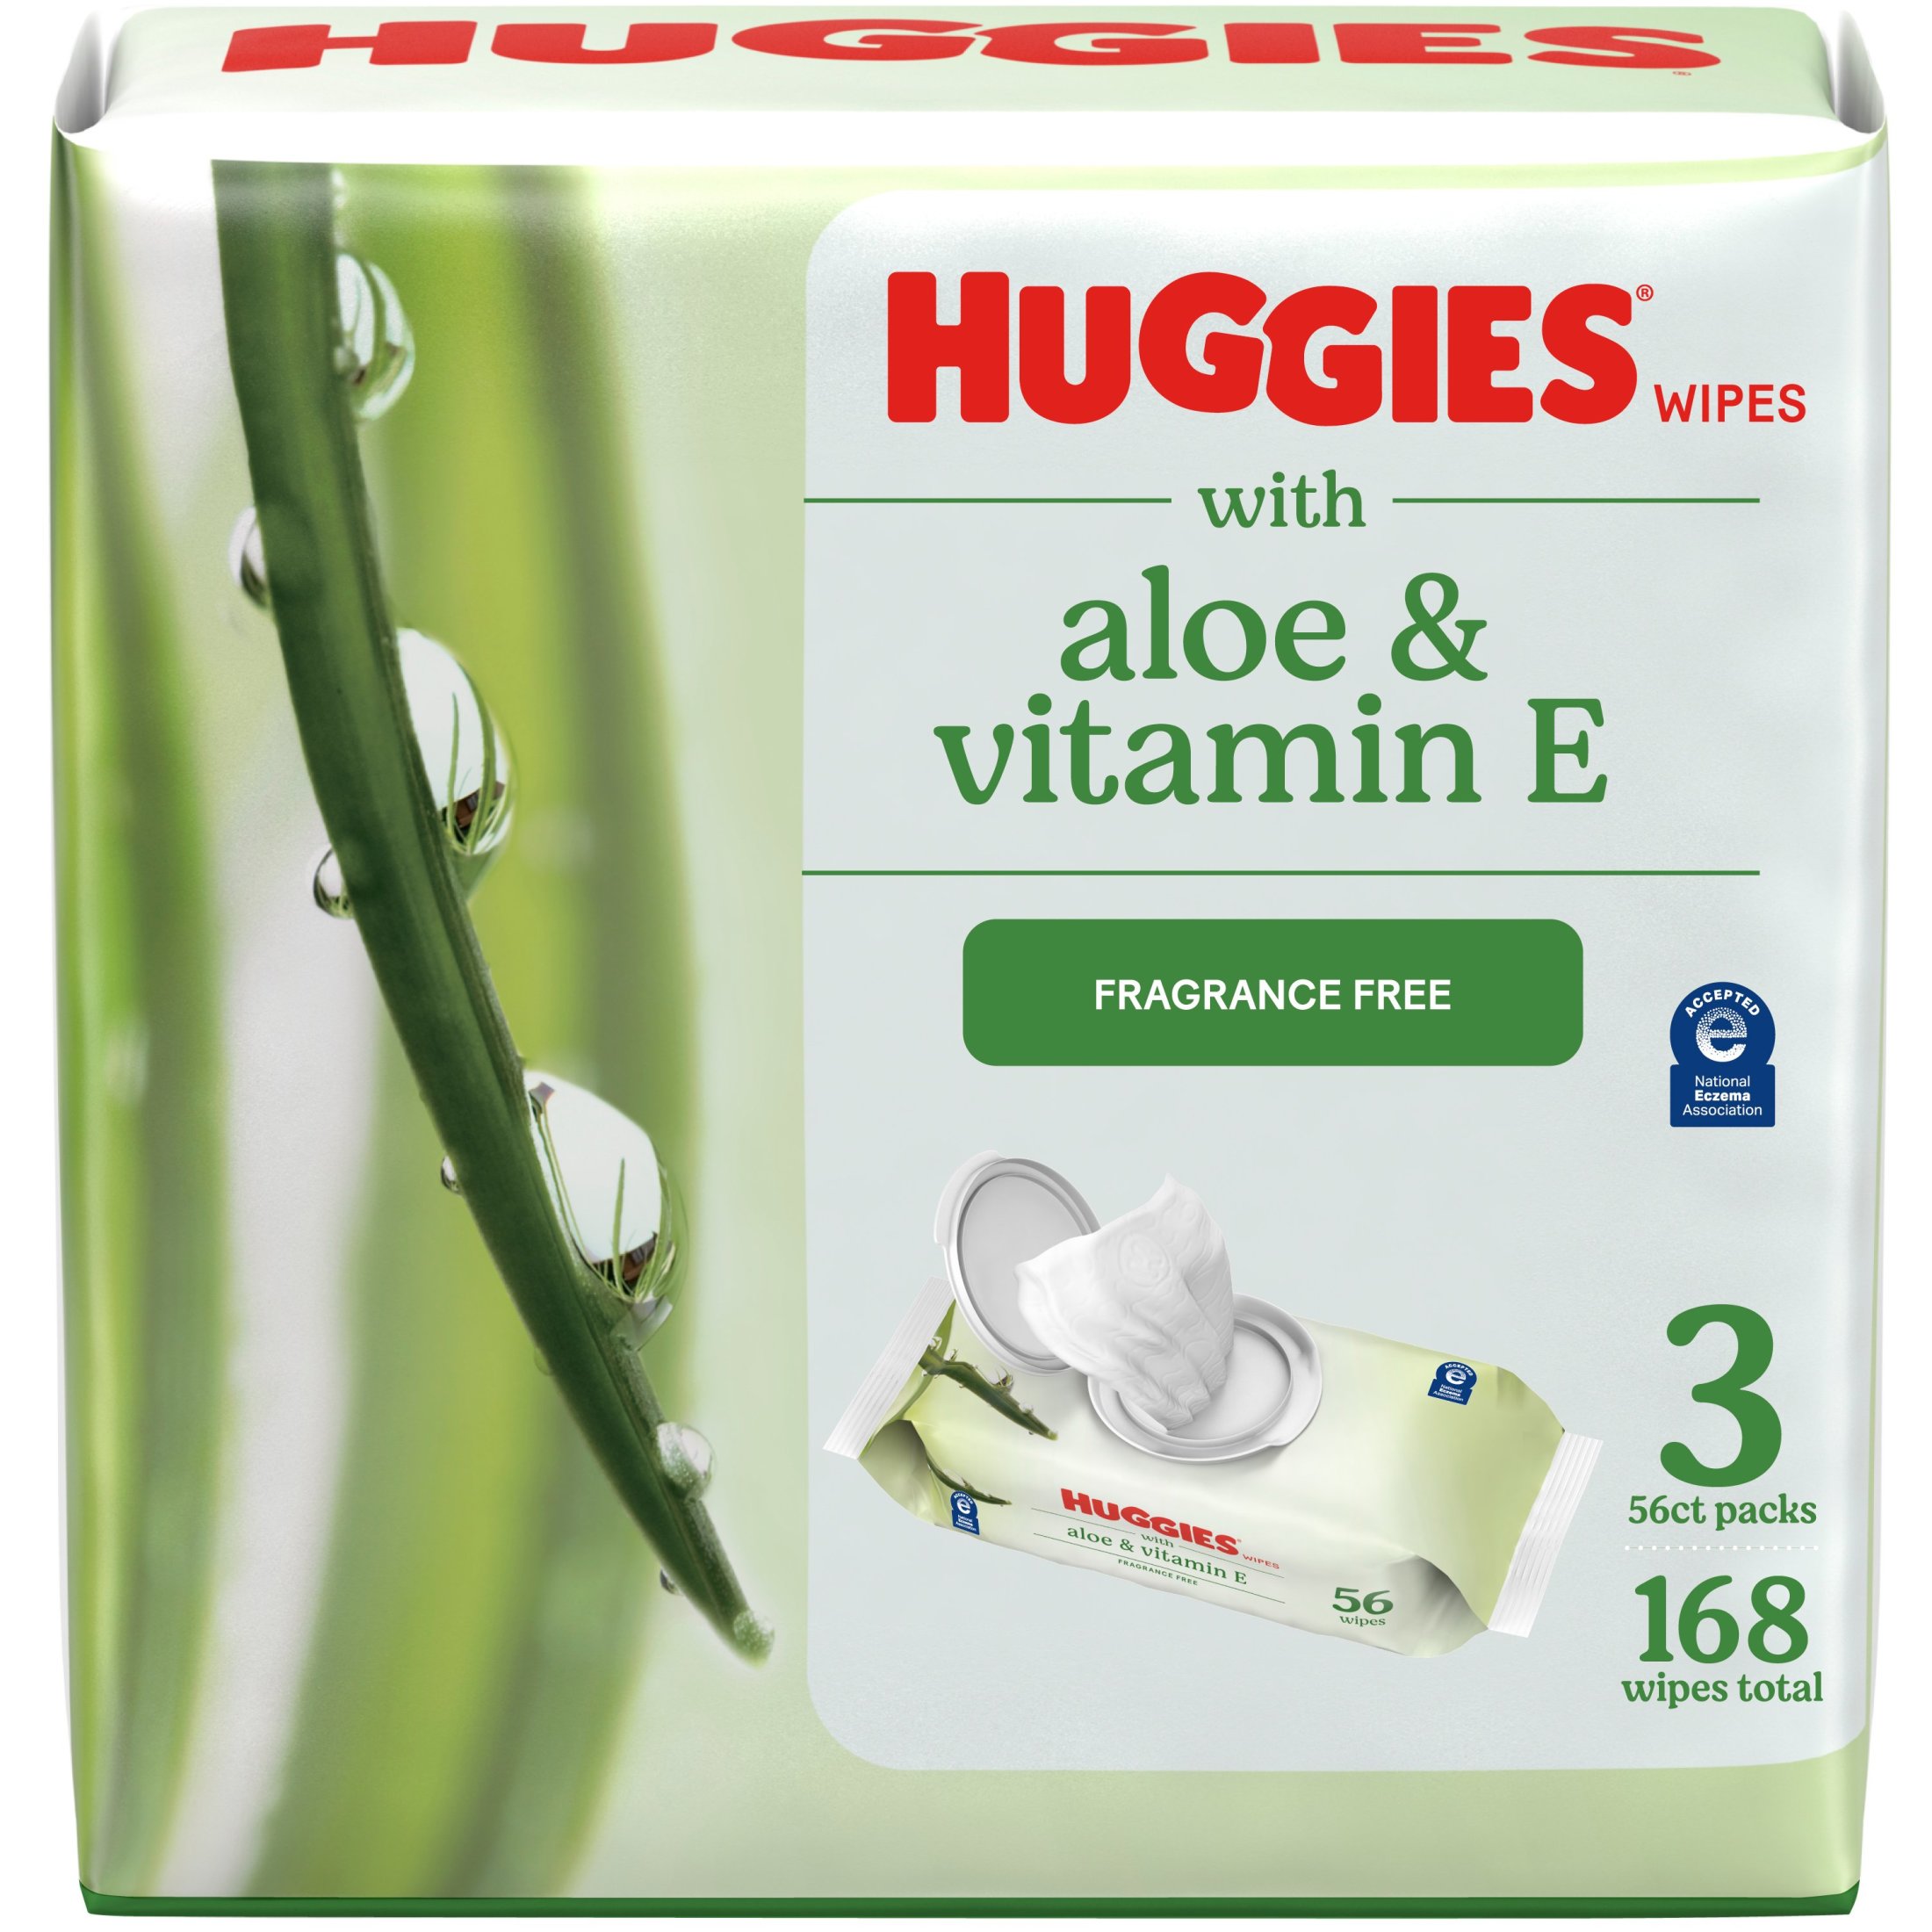 Huggies Aloe & Vitamin E Wipes, Unscented, 3 Pack, 168 Total Ct - image 1 of 9